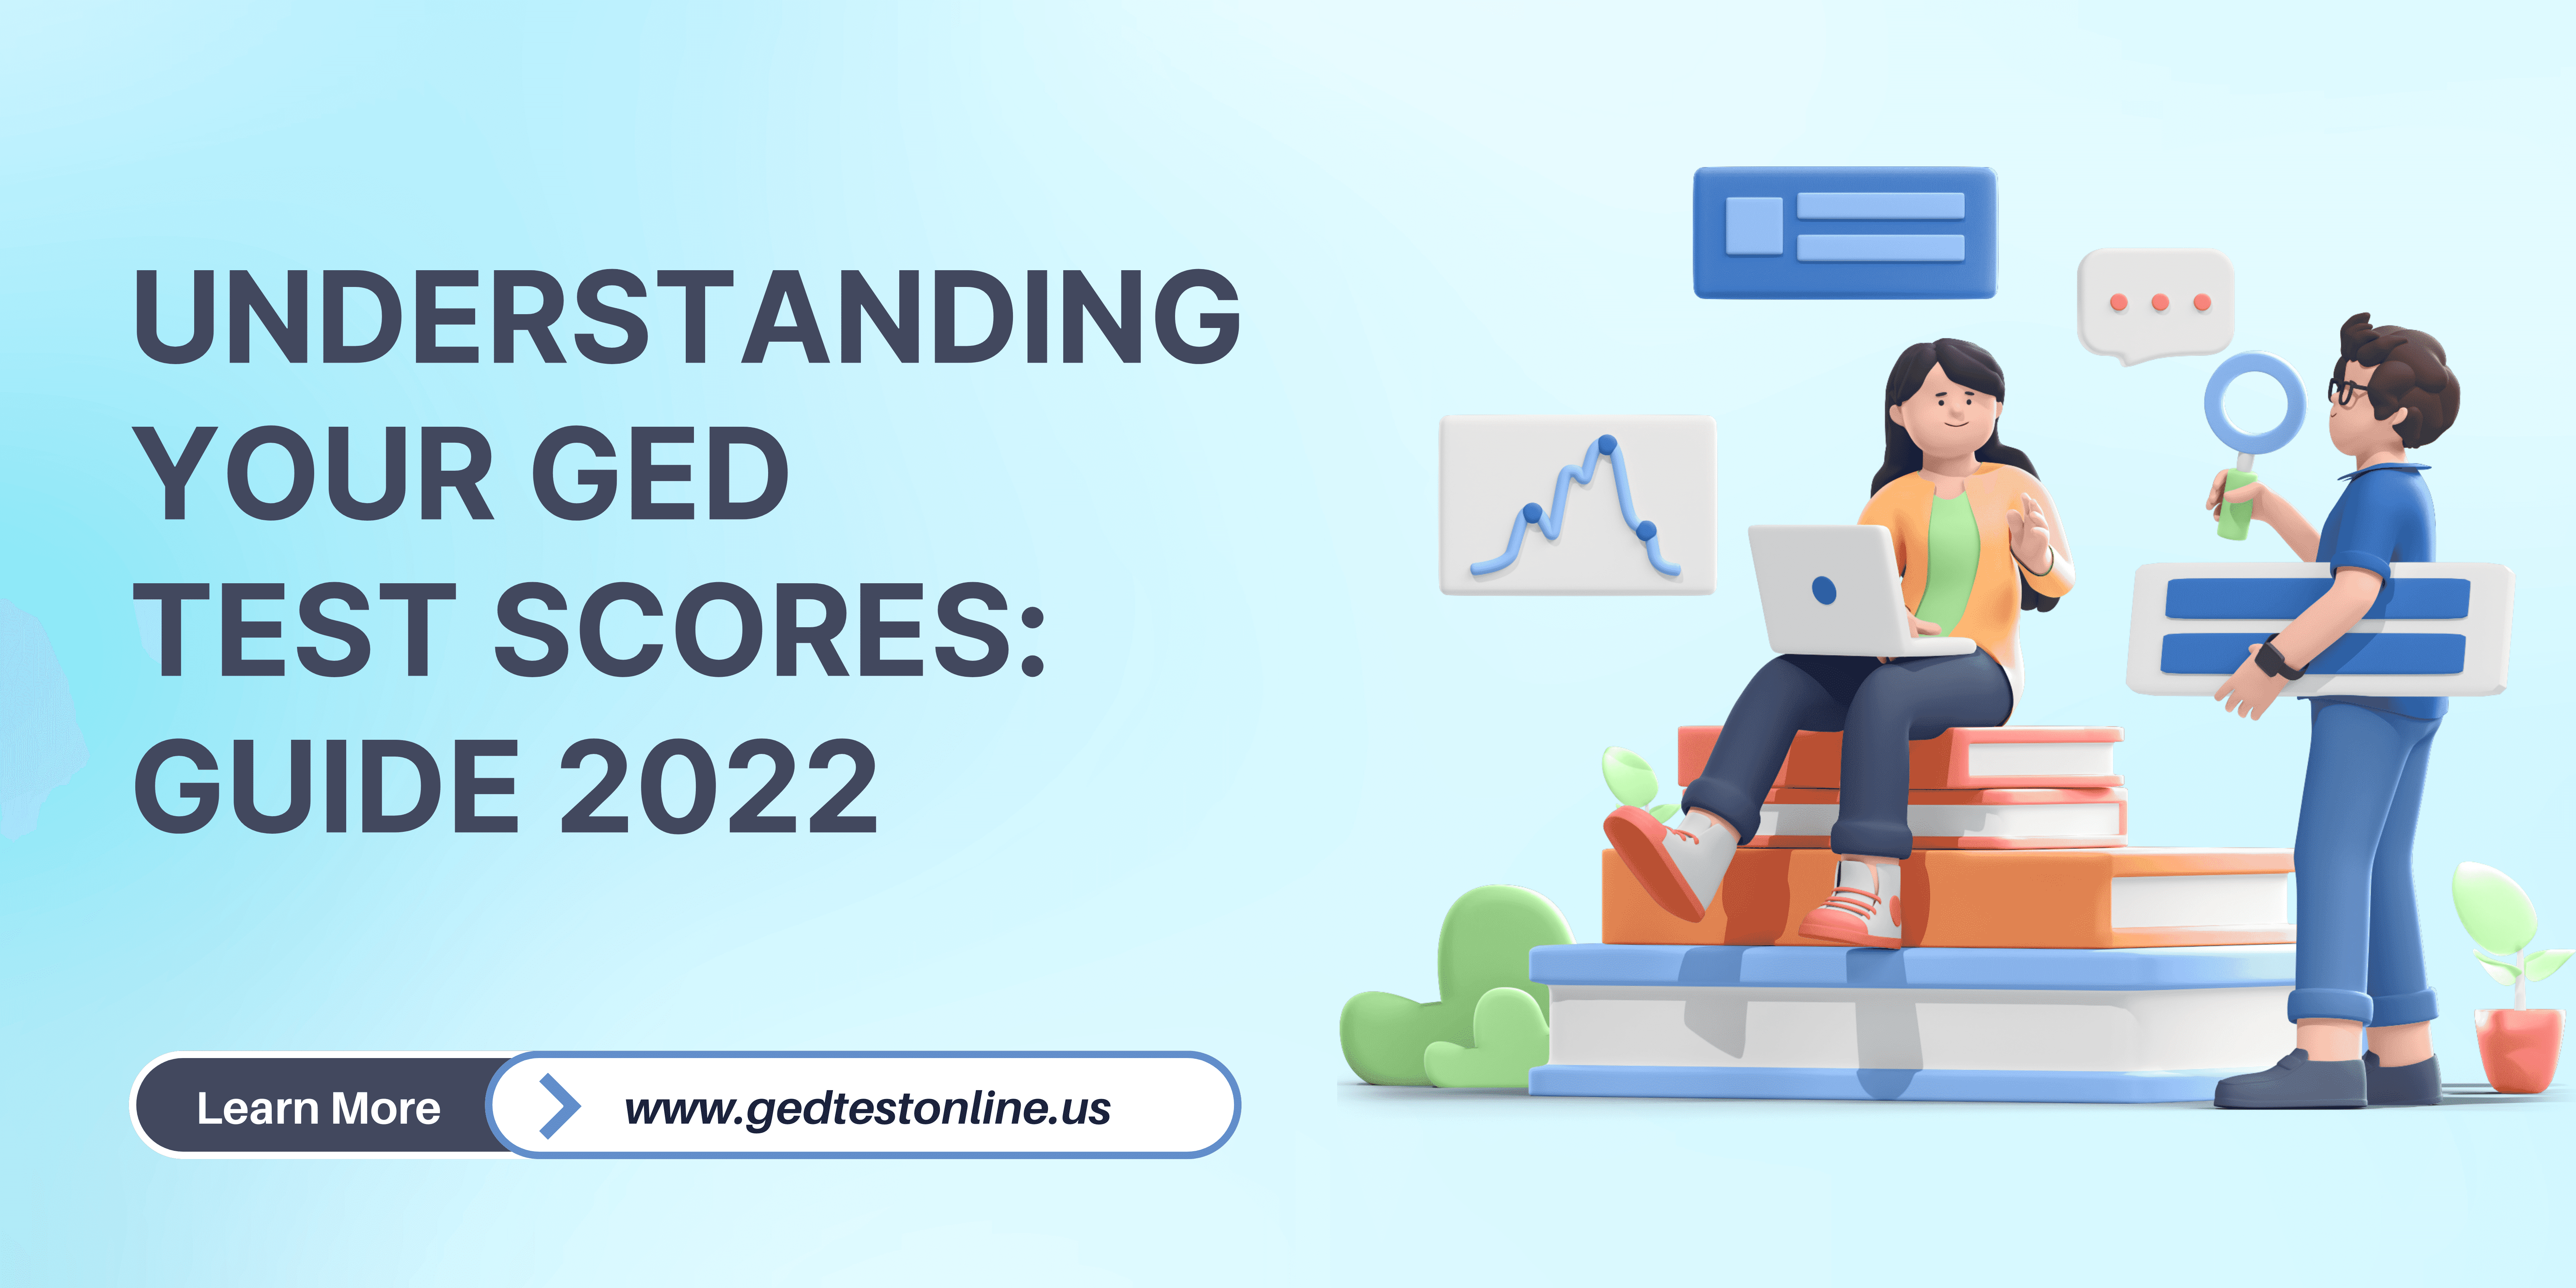 Understanding Your GED Test Scores: Guide 2022